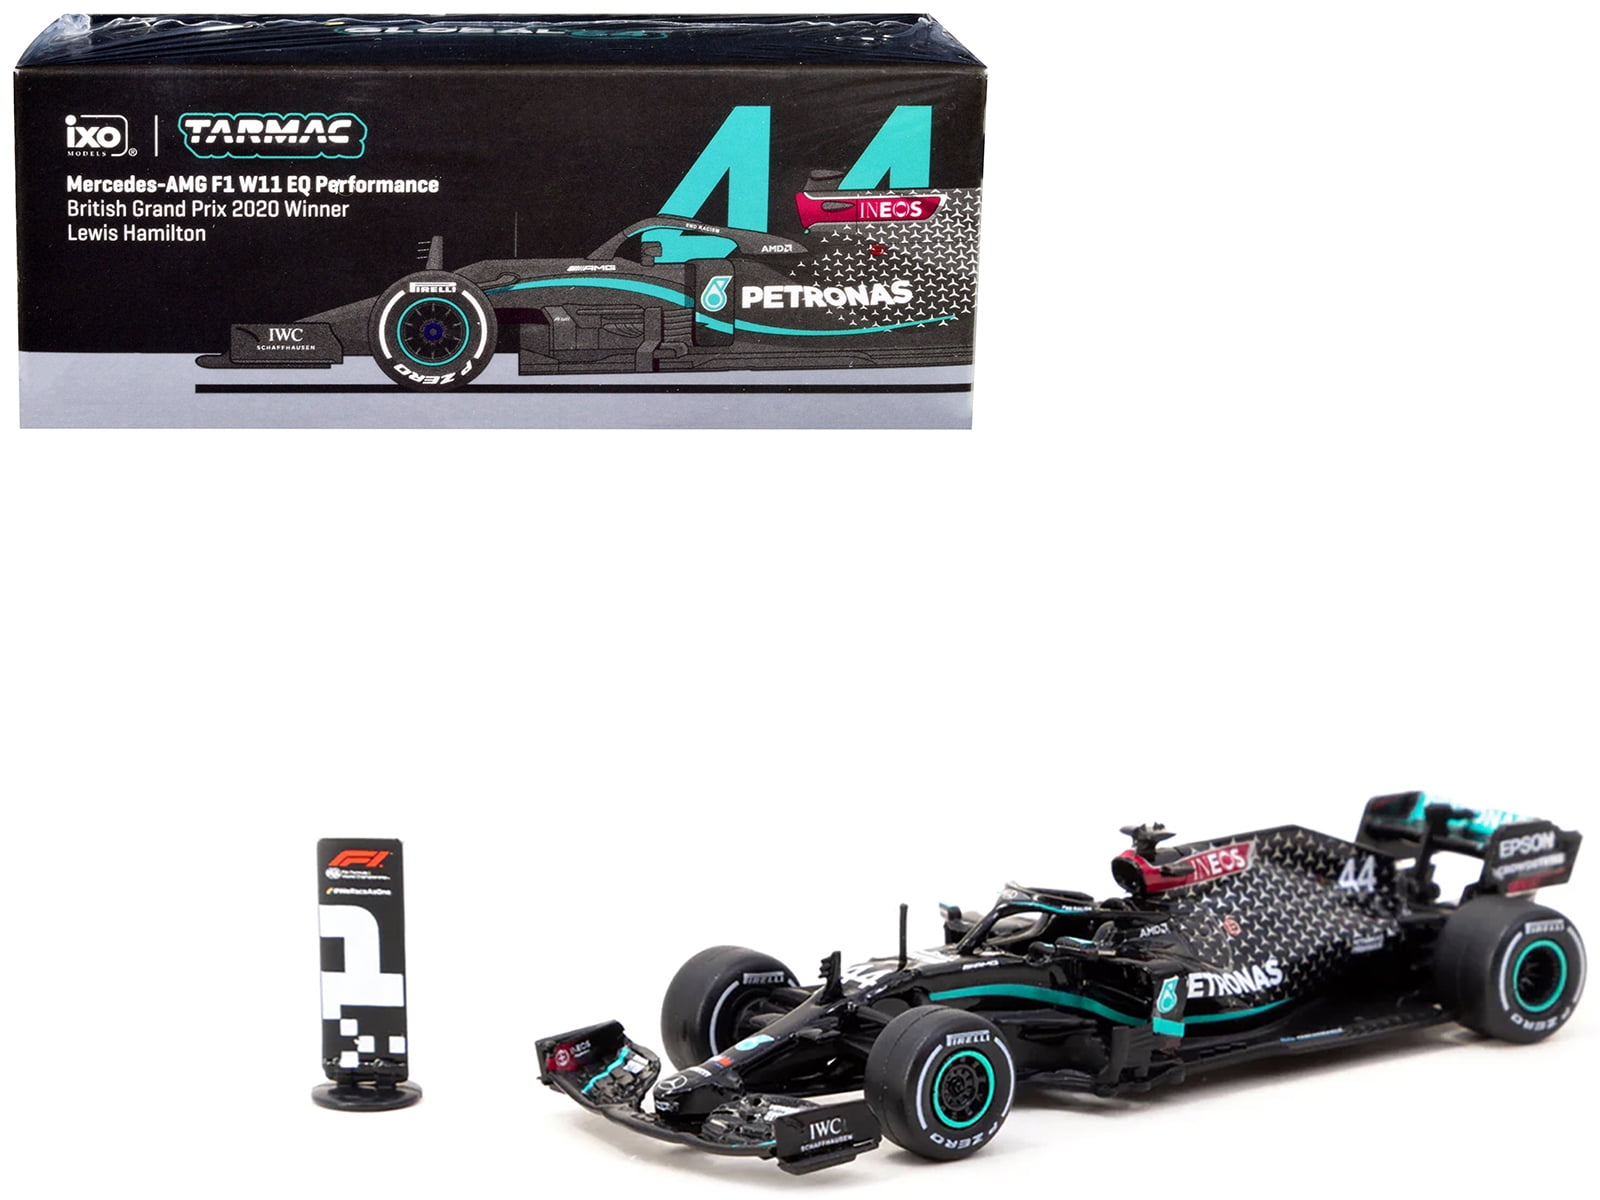 You Can Now Buy A Lego Set With Hamilton's Mercedes F1 Car And The